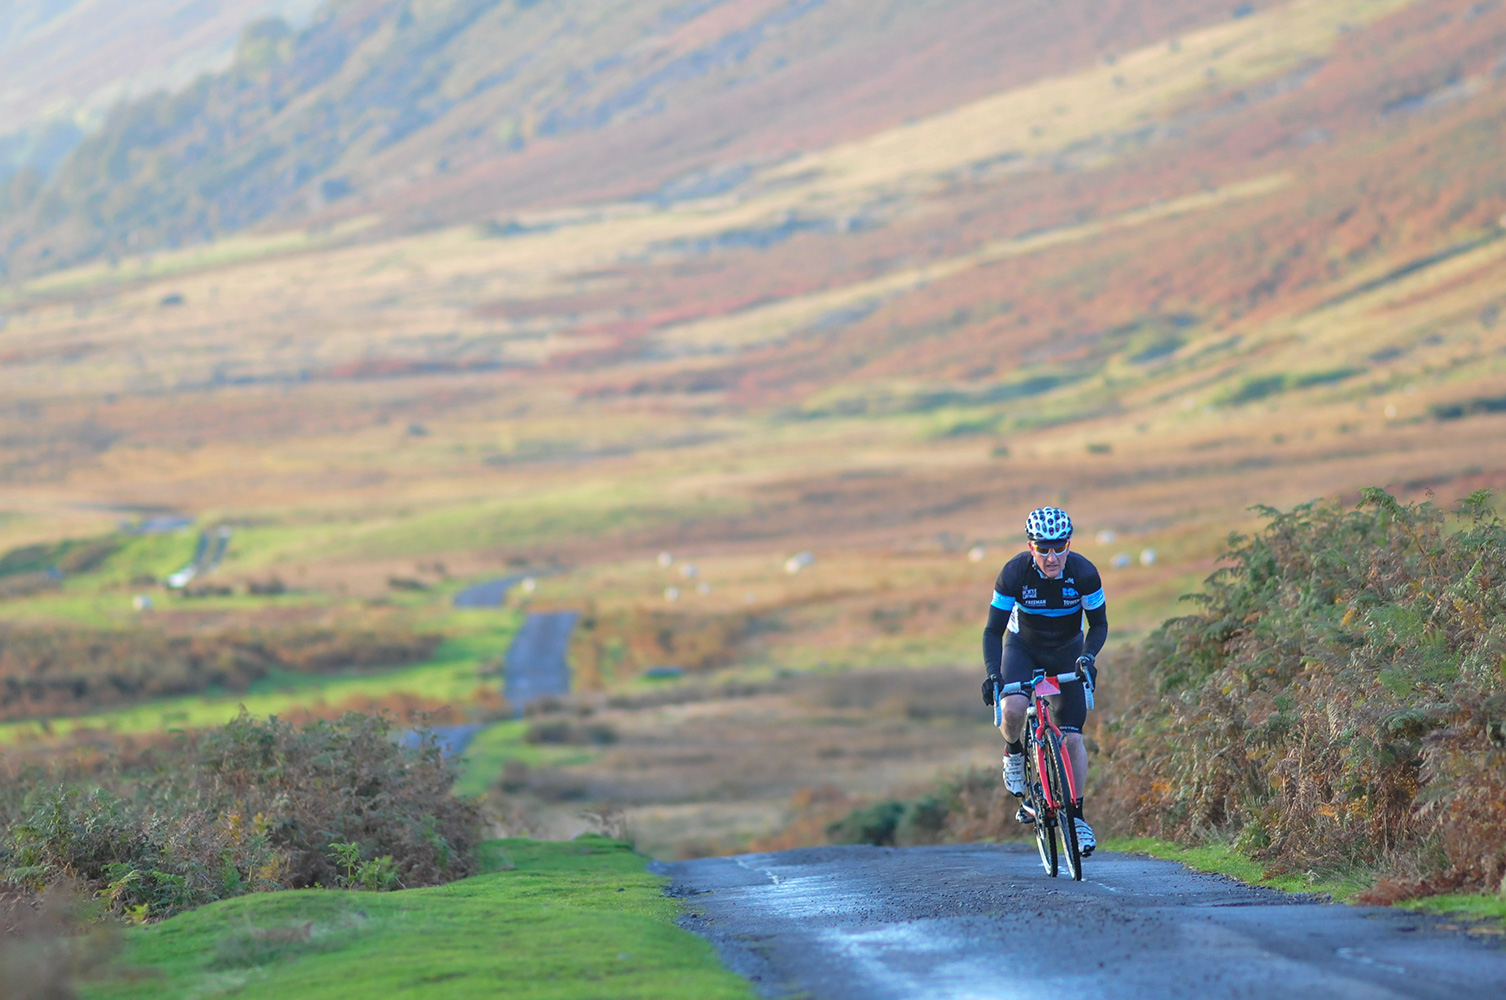 The Monster Miles is a 62 mile (55% off road) Cyclo-Cross Sportive in Cumbria organised by Cycling Weekly and run by Rather Be CyclingHere the leading rider is coming up onto Caldbeck Commons from Mosedale early on a beautiful October morning.